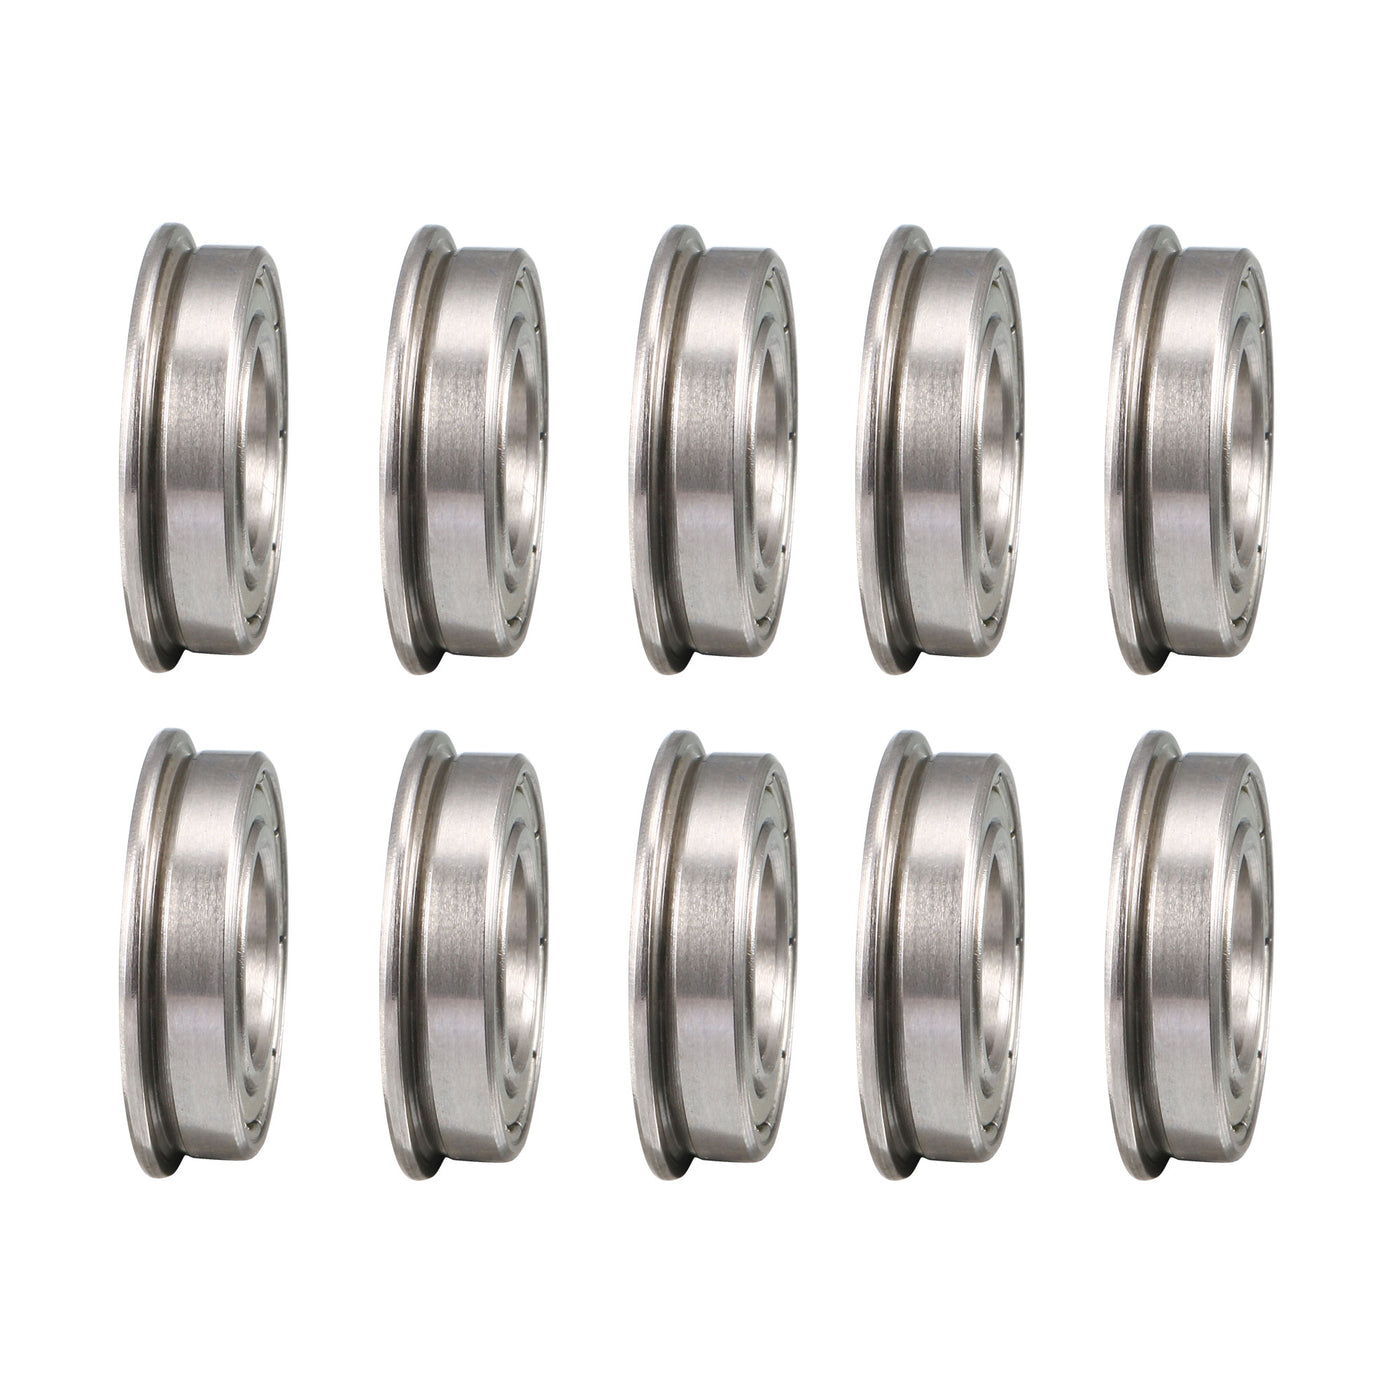 uxcell Uxcell F6800zz Flange Ball Bearing 10x19x5mm Shielded ABEC-3 Chrome Steel Bearings 10pcs